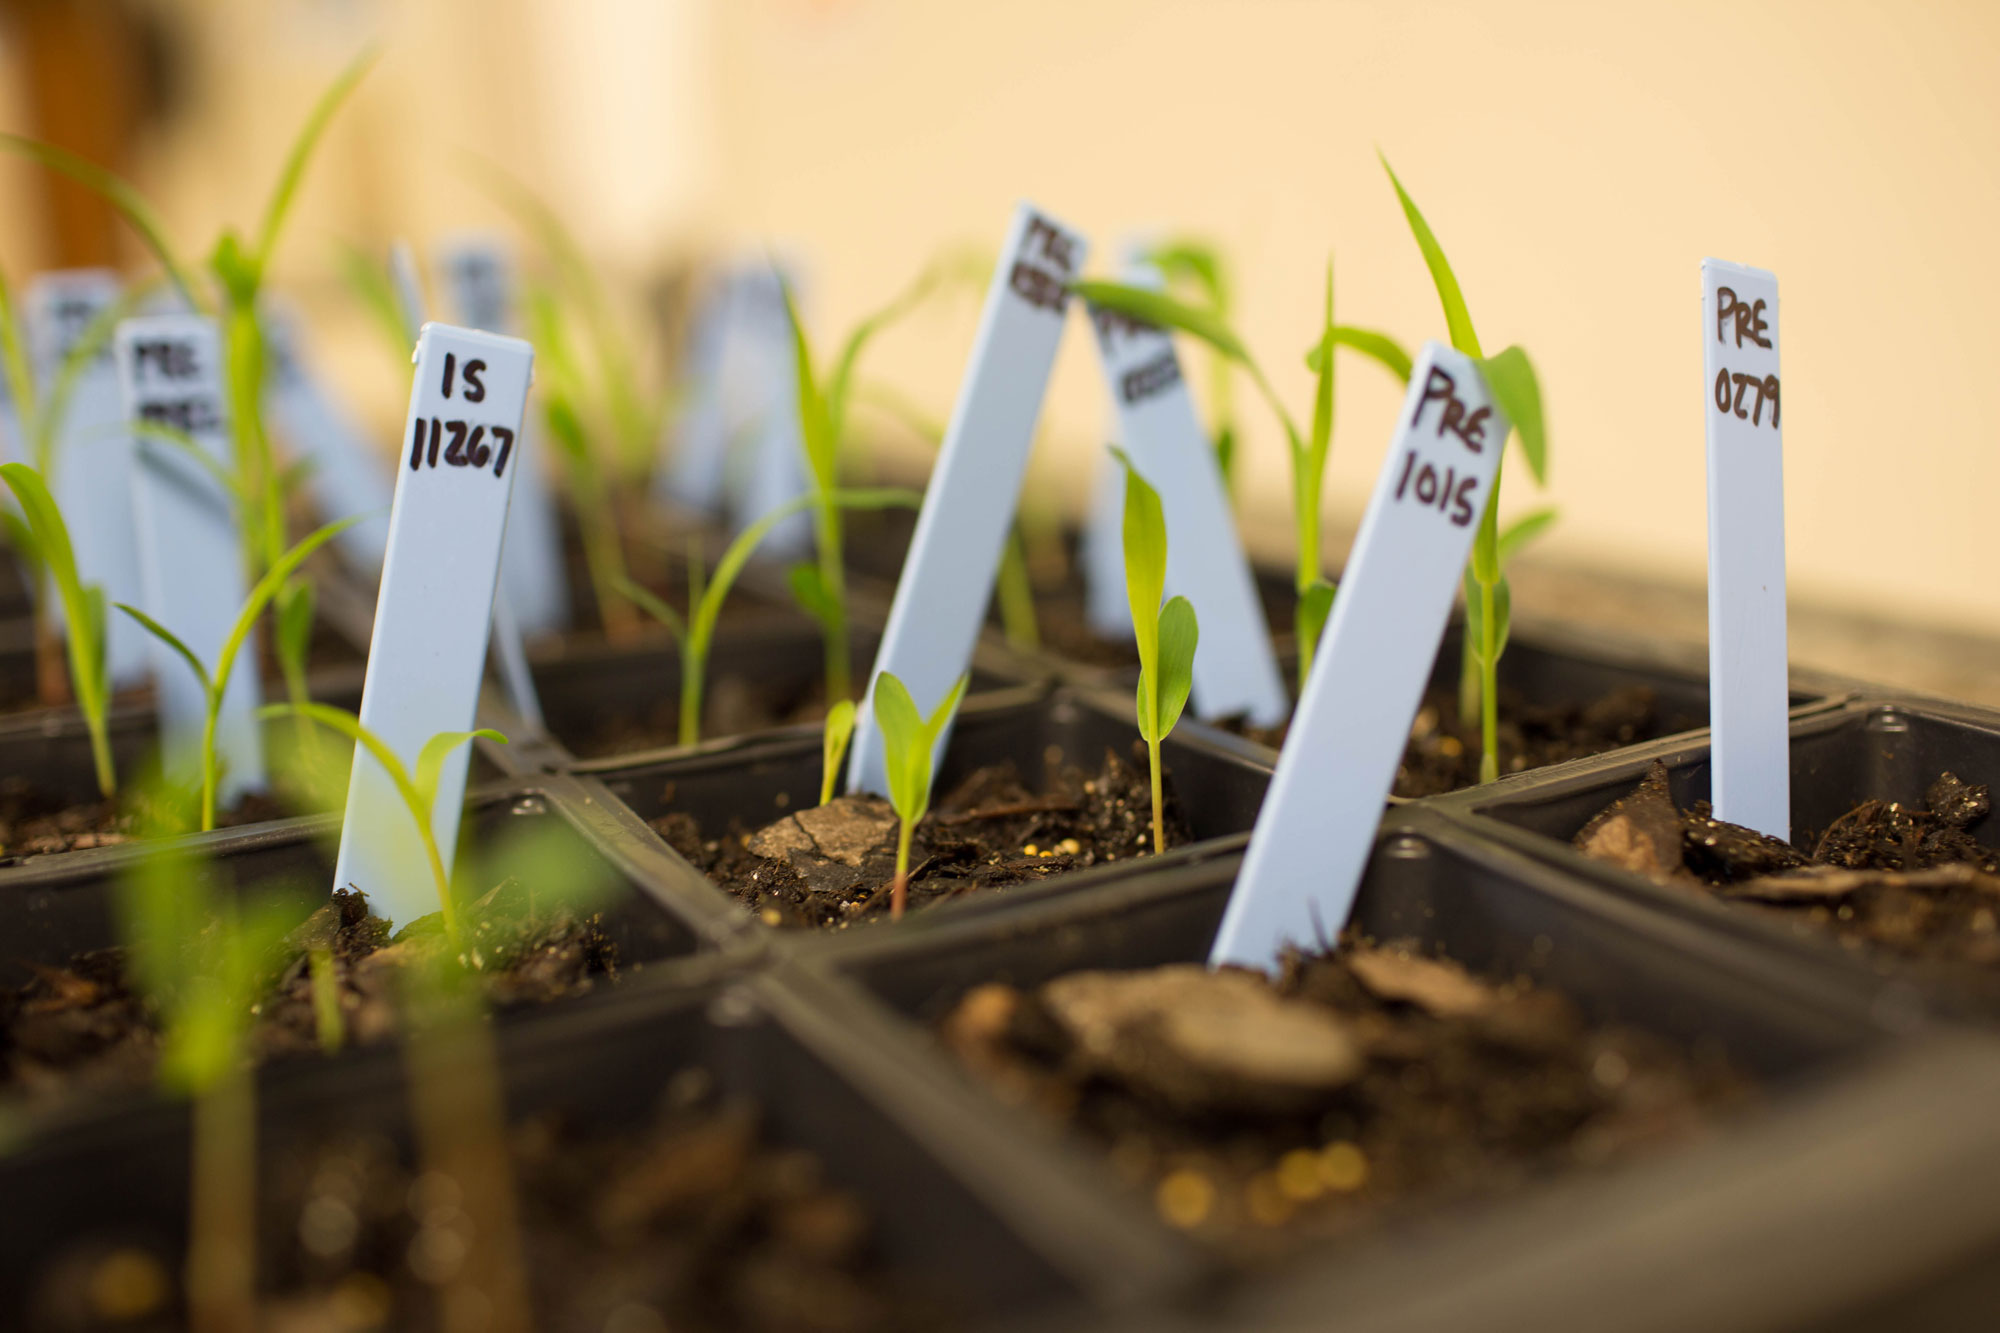 Photograph of sorghum seedling is small, square, plastic pots. Each seedling has a plastic maker with a label.